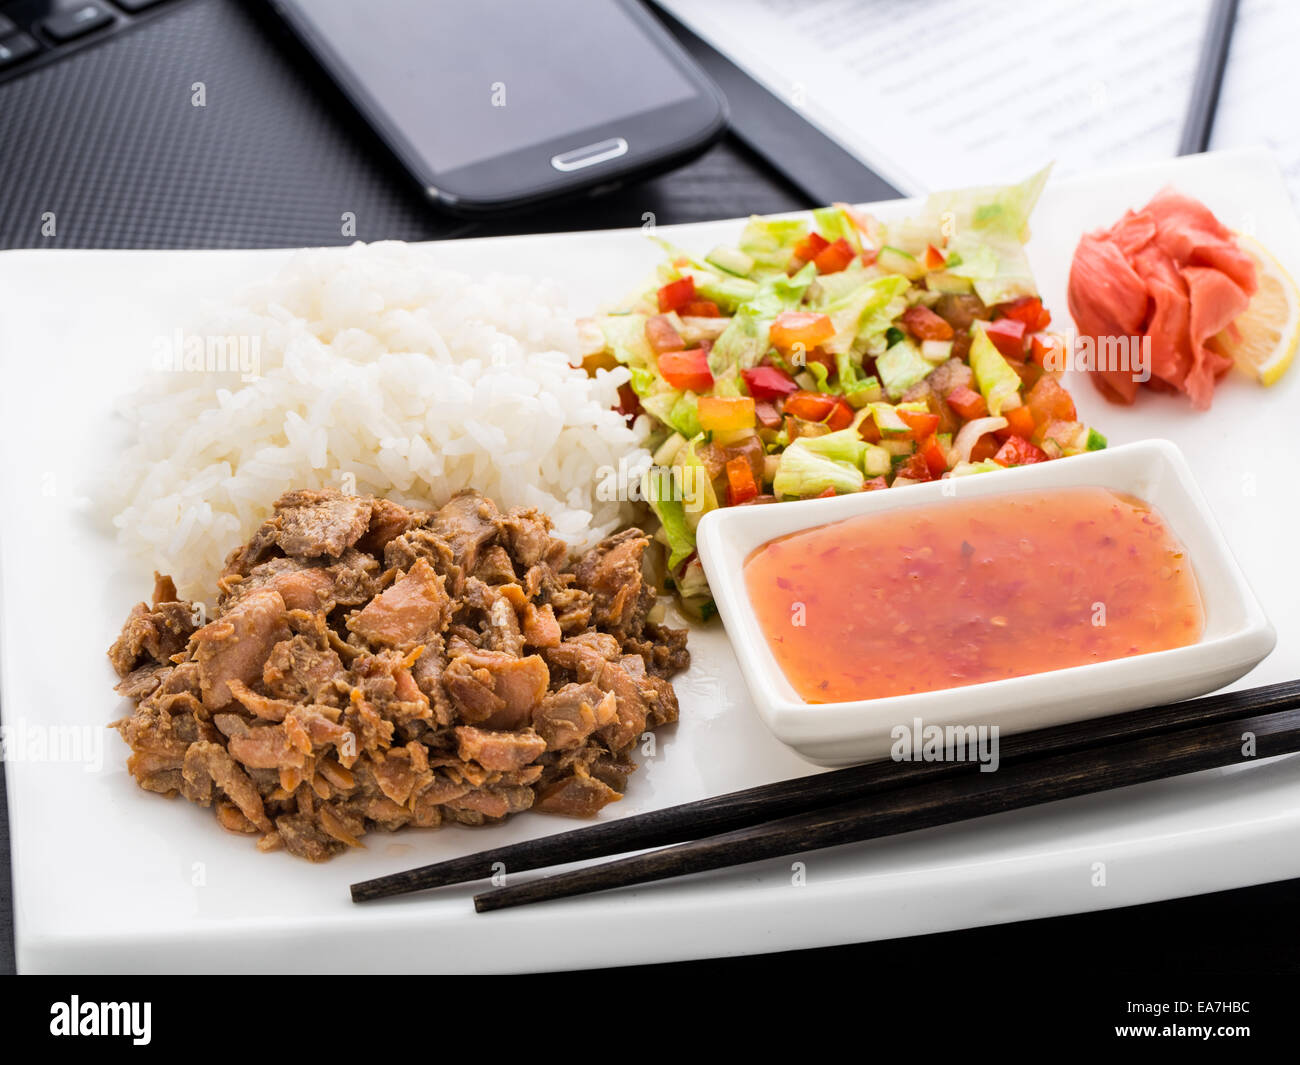 Quick asian style lunch in office Stock Photo